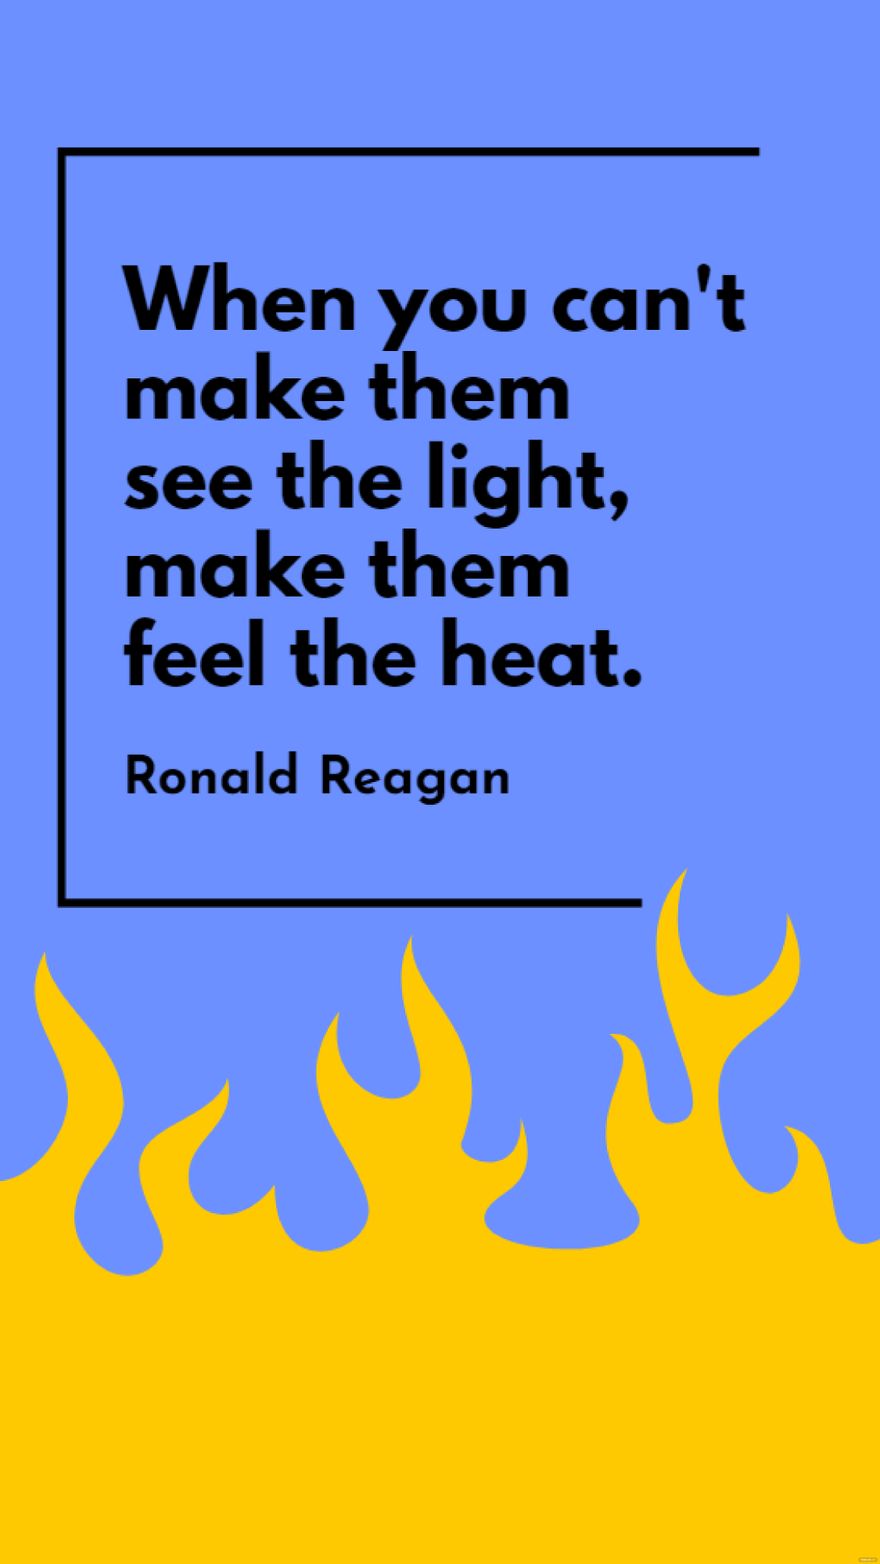 Ronald Reagan - When you can't make them see the light, make them feel the heat.